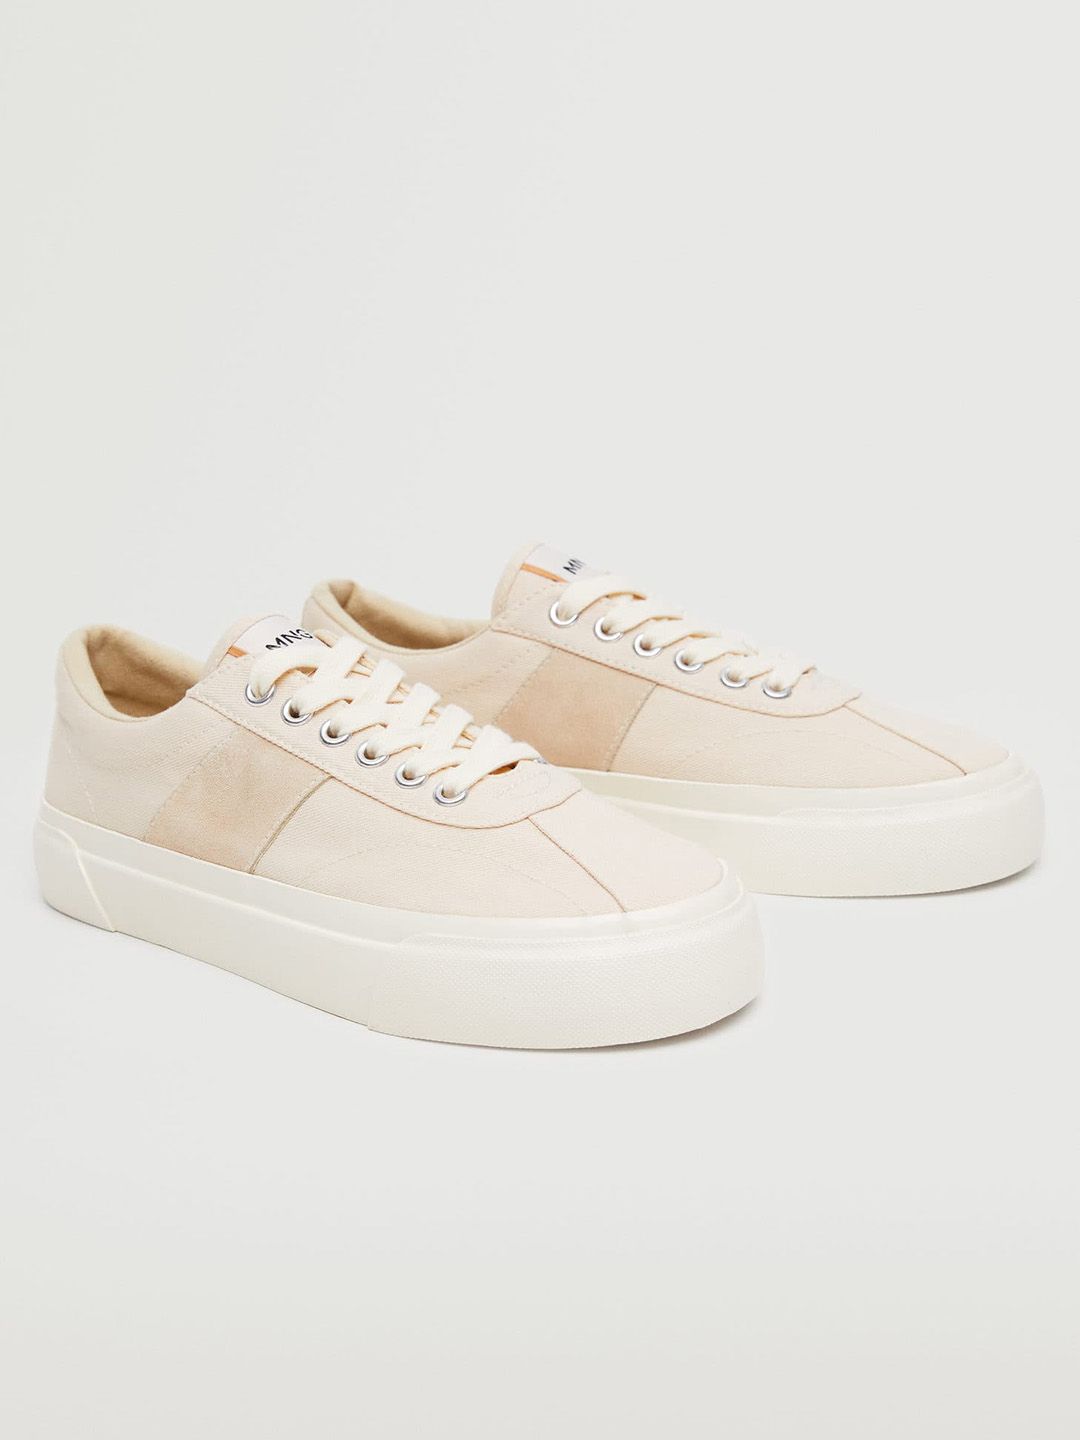 MANGO Women Off White Solid Sneakers Price in India